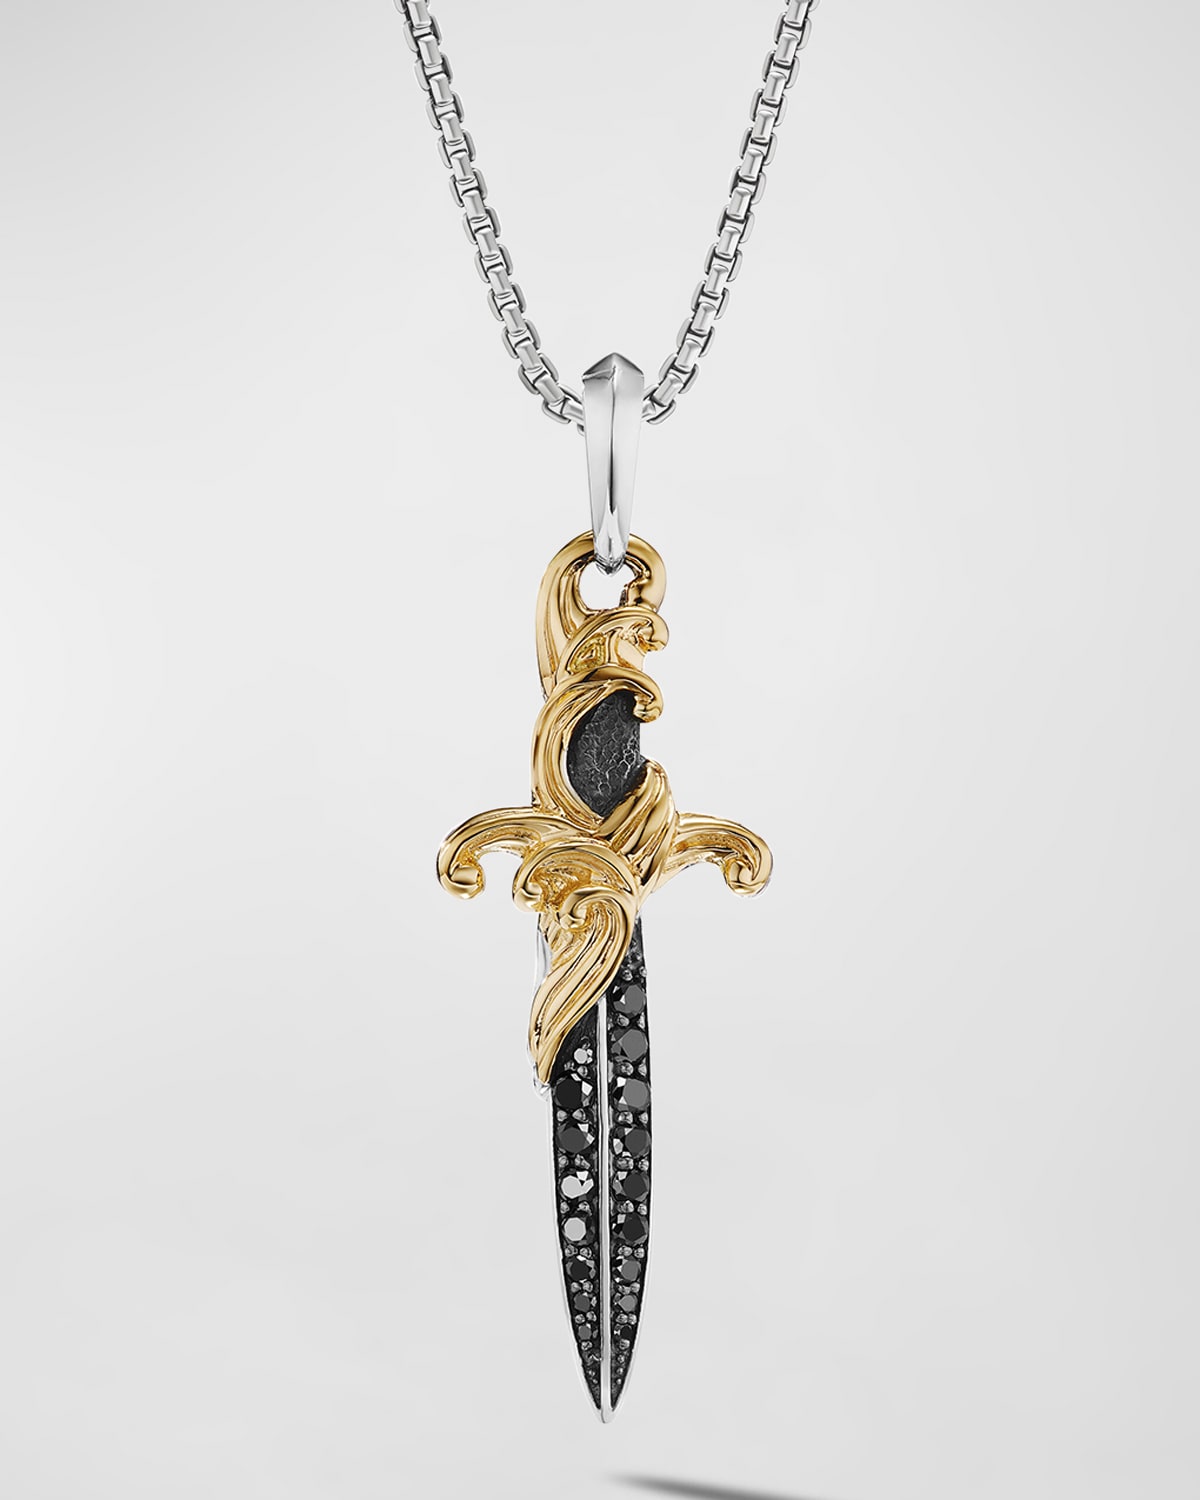 David Yurman Men's Waves Dagger Amulet In Silver With 18k Gold And Black Diamonds, 43.8mm